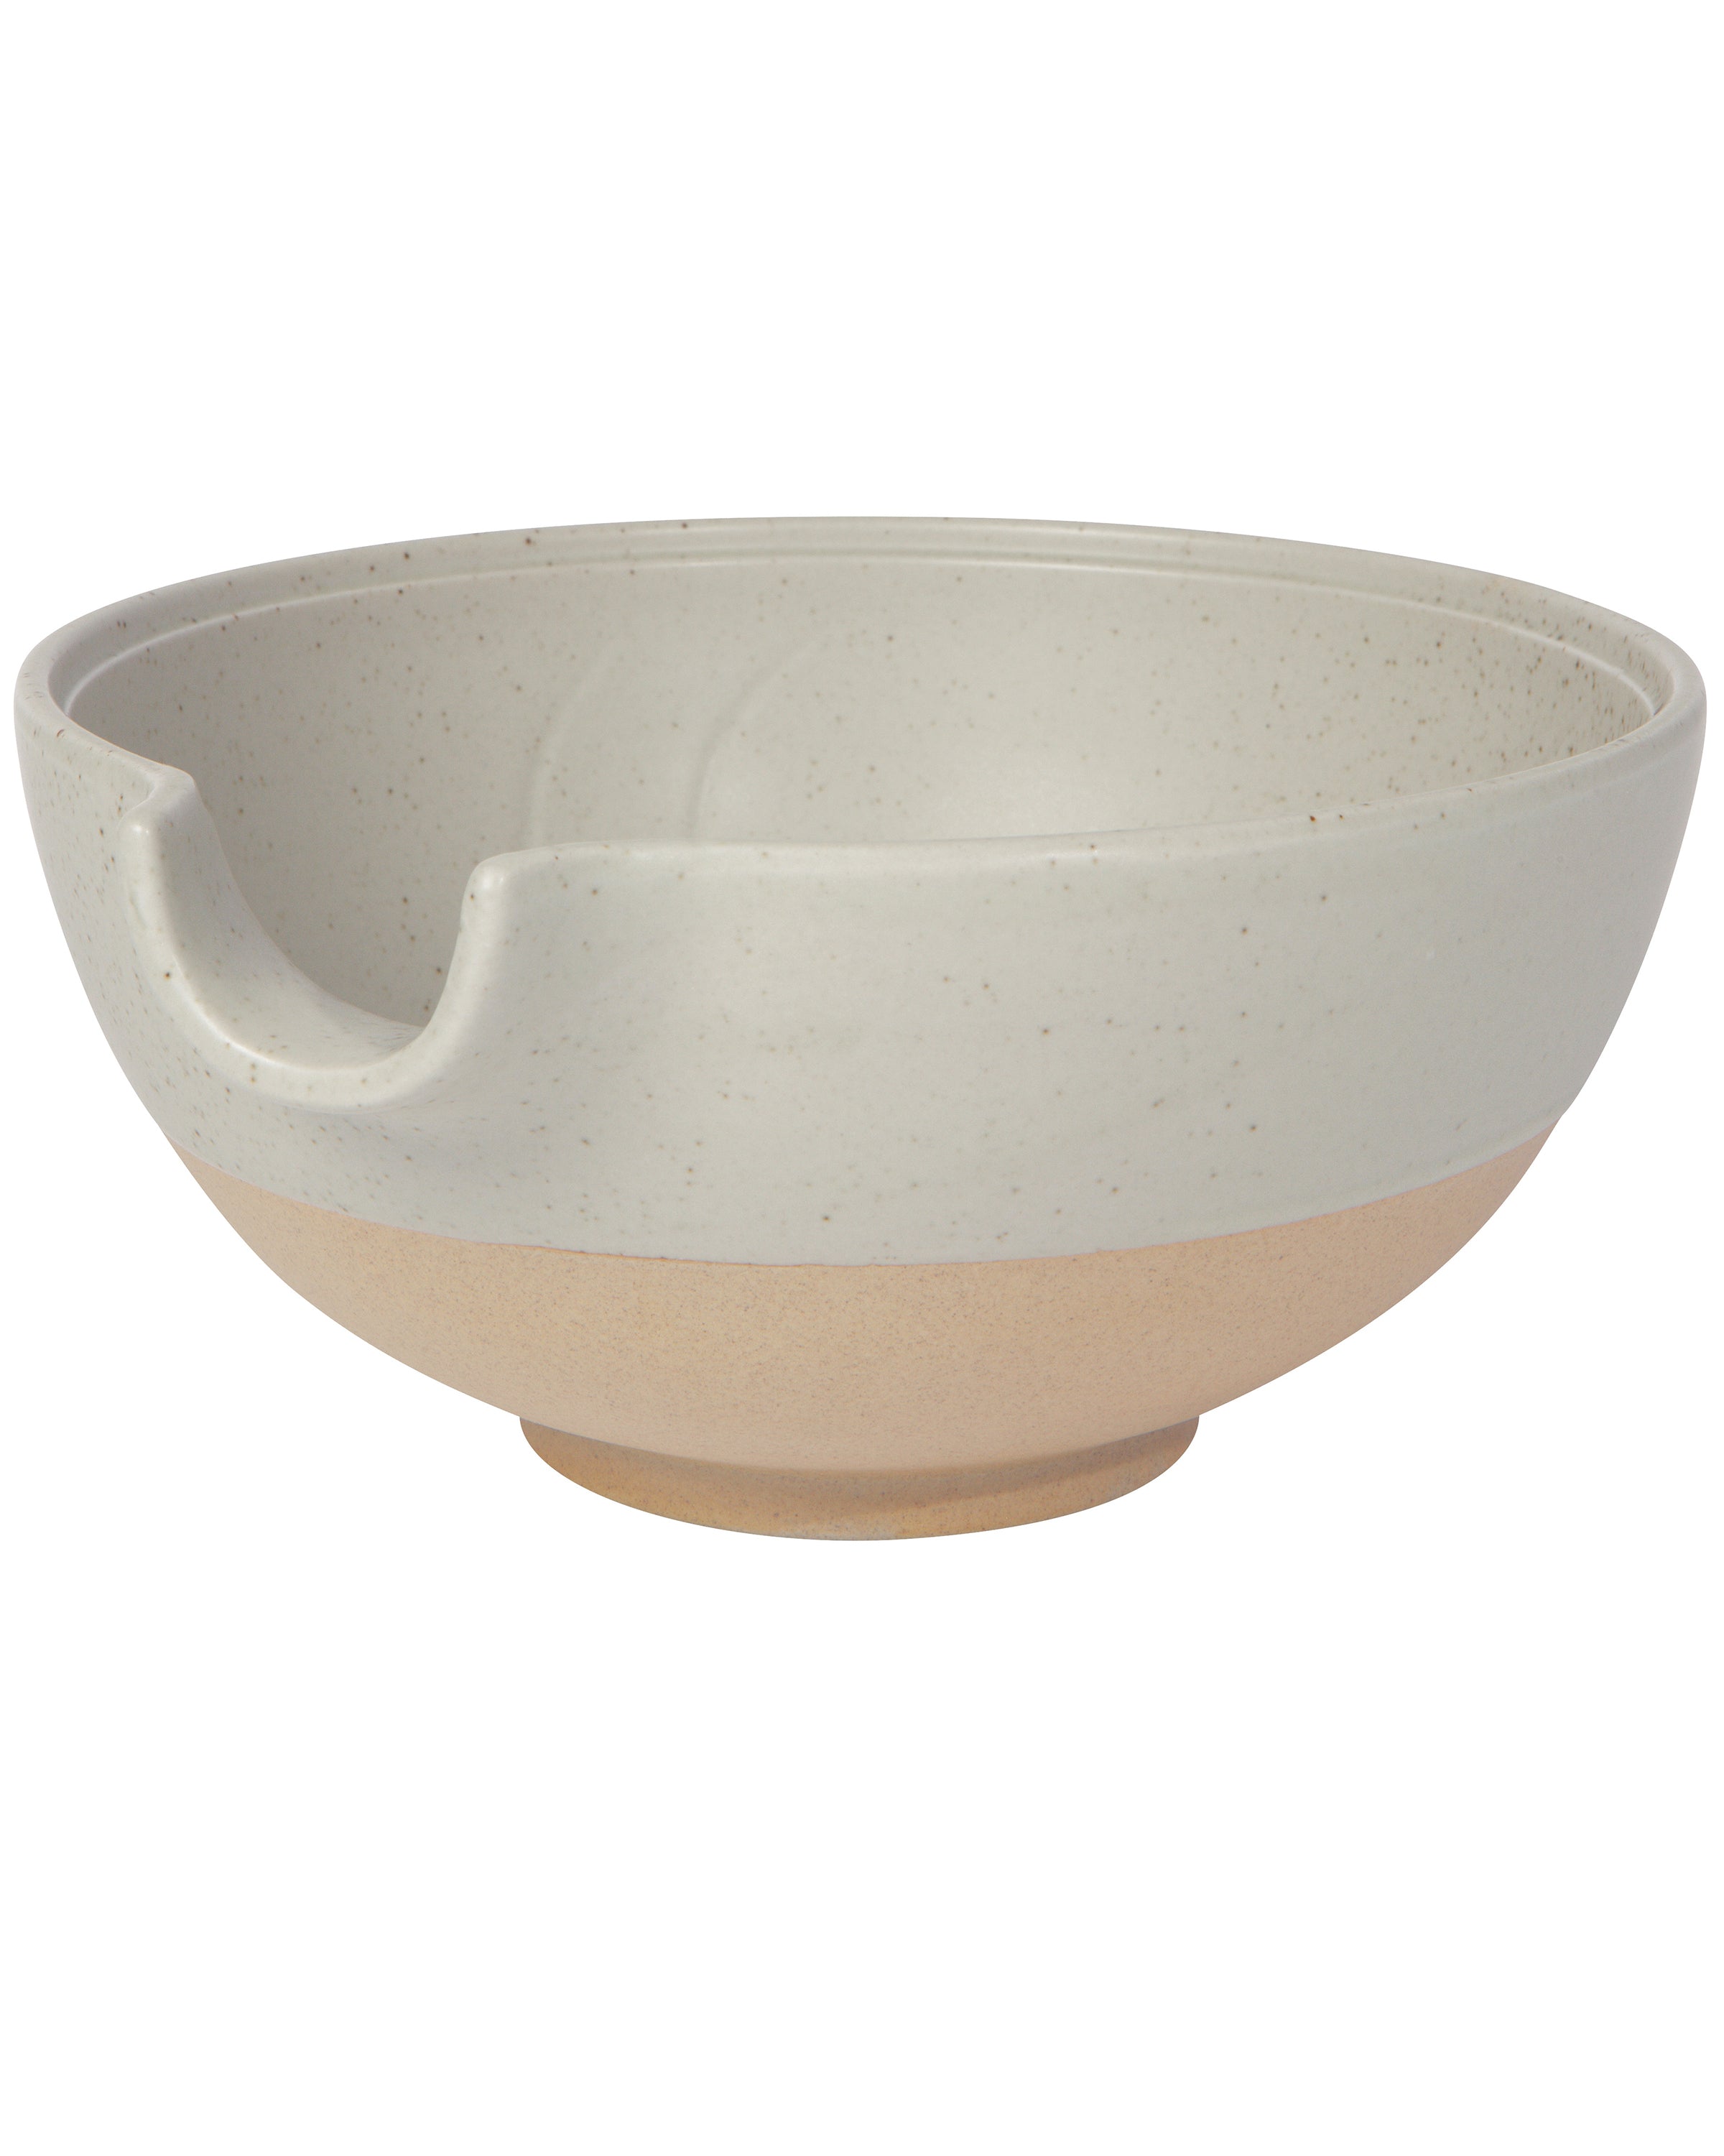 Danica Designs  Maison Large Element Mixing Bowl in Gray